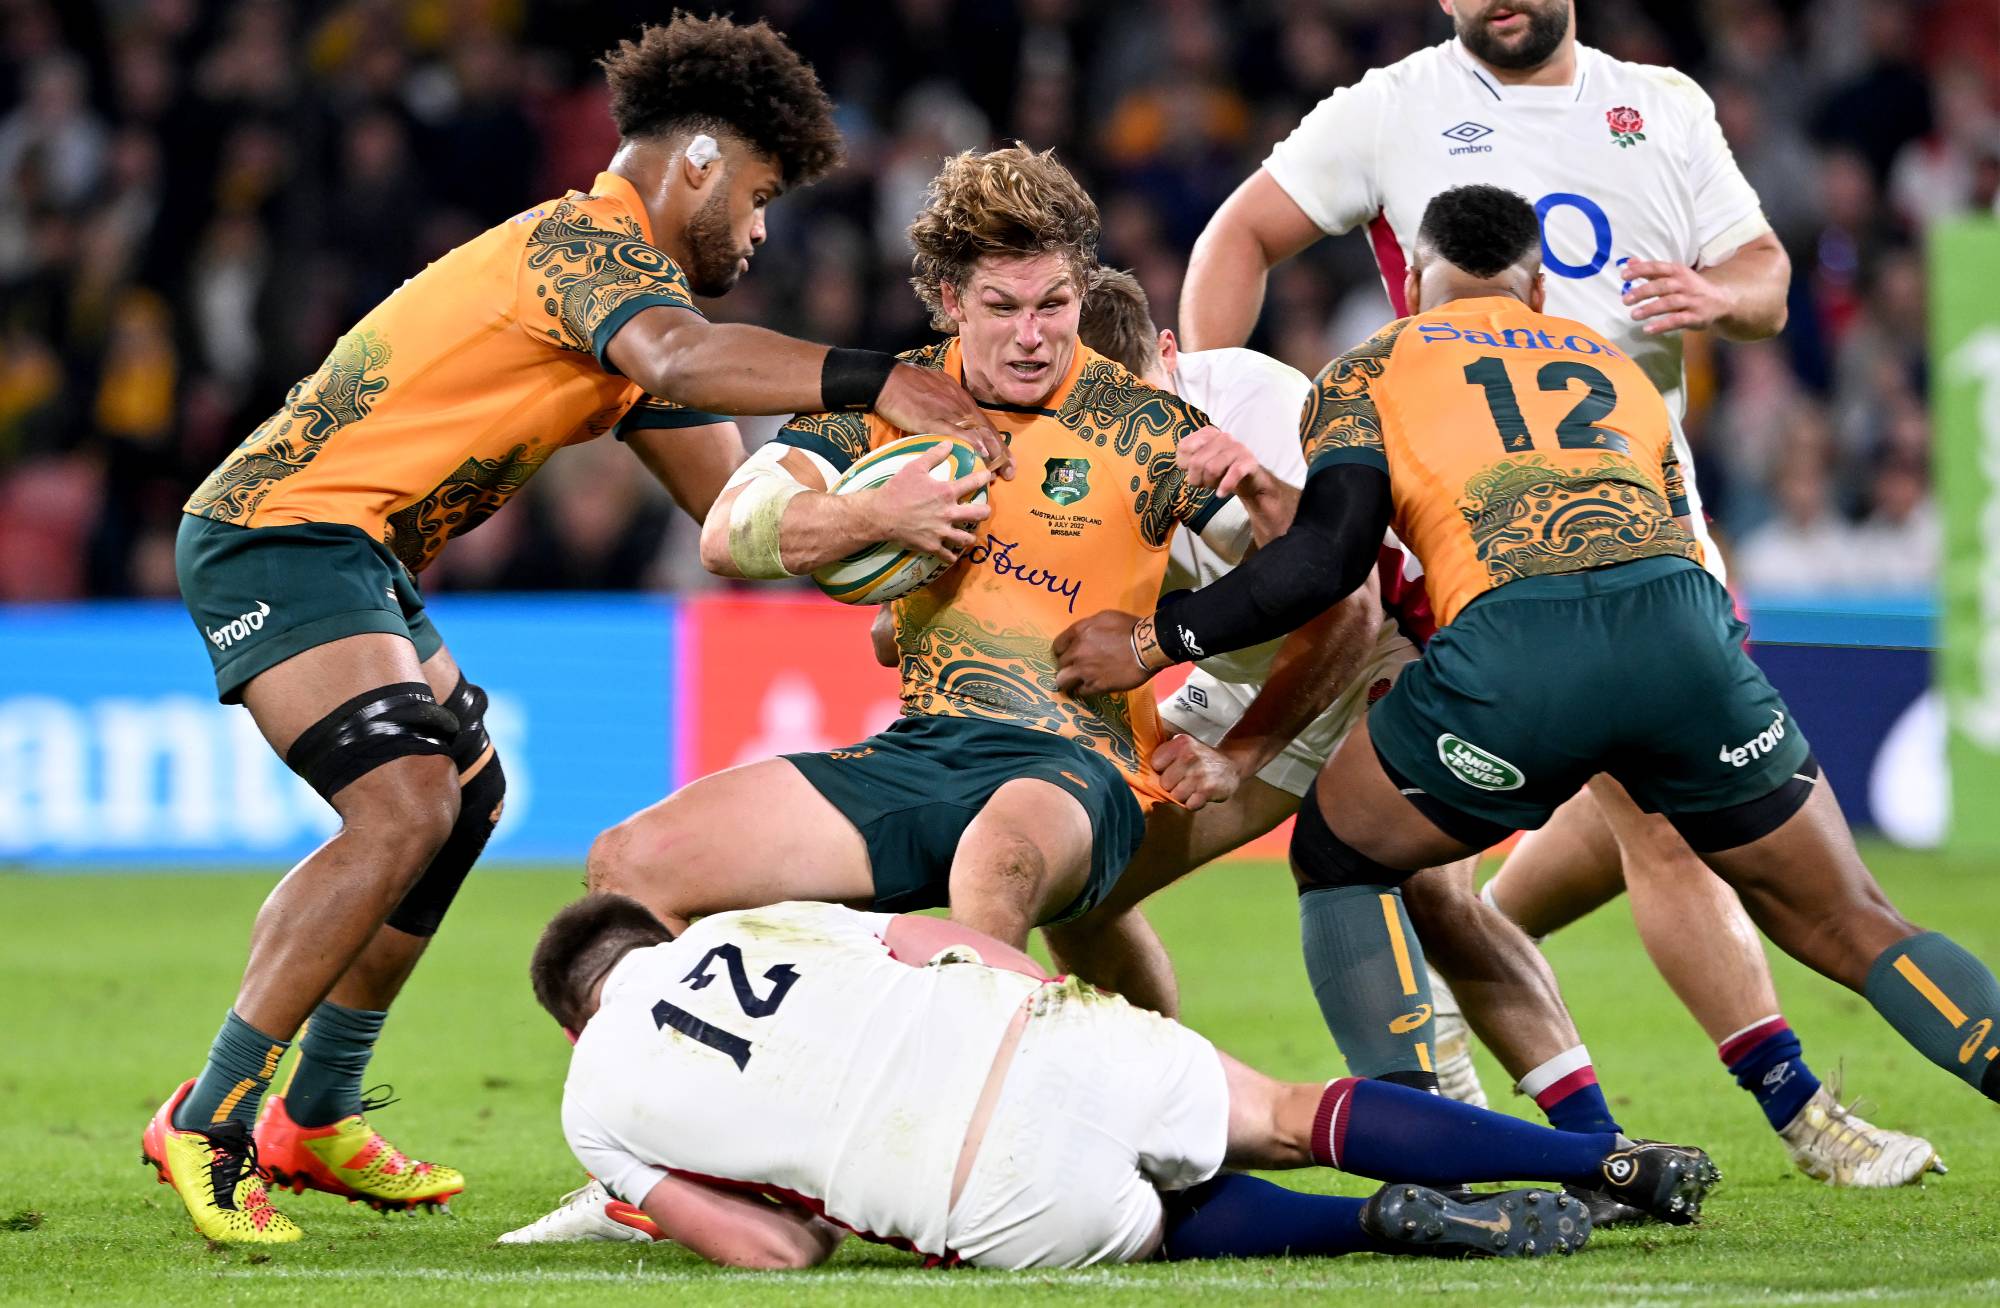 Michael Hooper of the Wallabies is tackled during game two of the International Test Match series between the Australia Wallabies and England at Suncorp Stadium on July 09, 2022 in Brisbane, Australia. (Photo by Bradley Kanaris - The RFU/The RFU Collection via Getty Images)